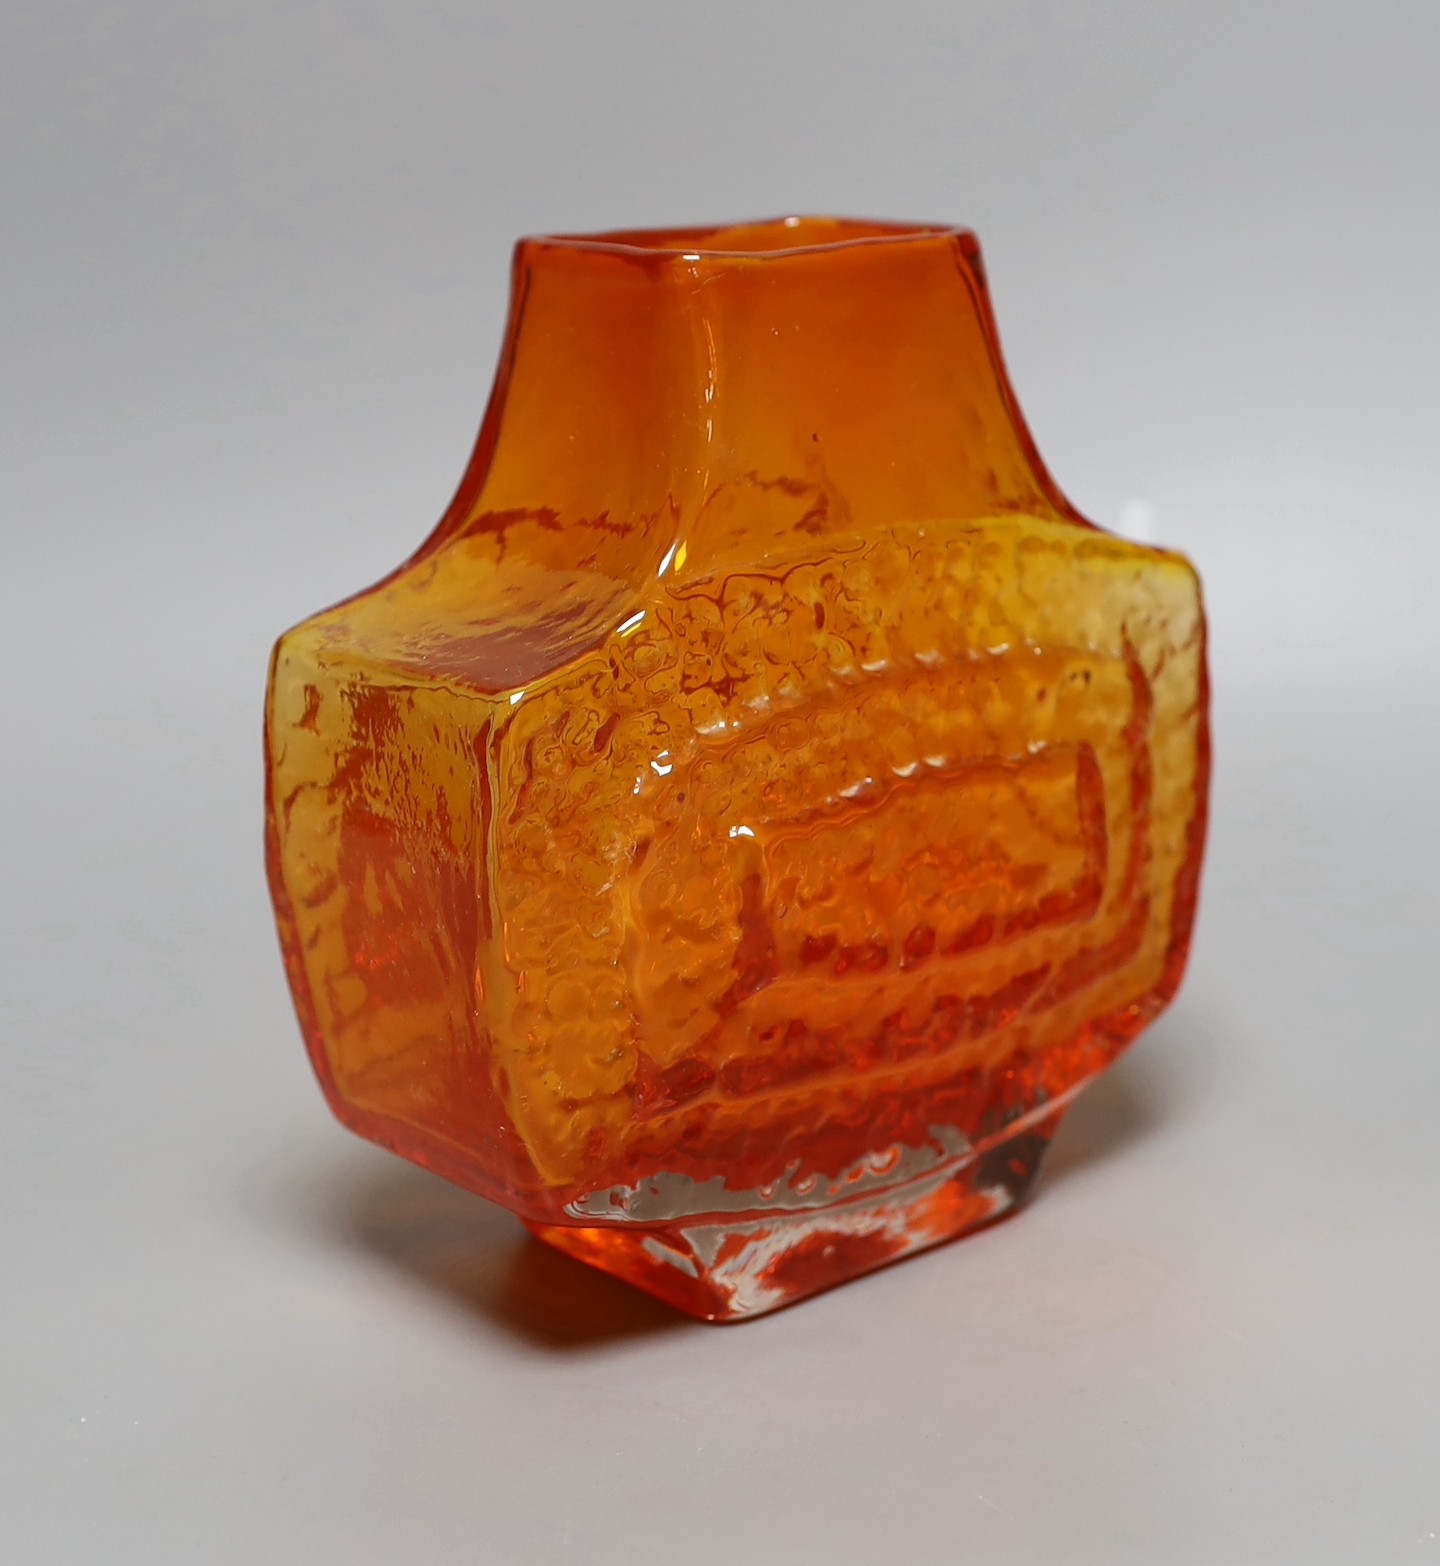 A Whitefriars 'TV' glass vase, designed by Geoffrey Baxter, pattern number 9677, tangerine glass, 17cm tall